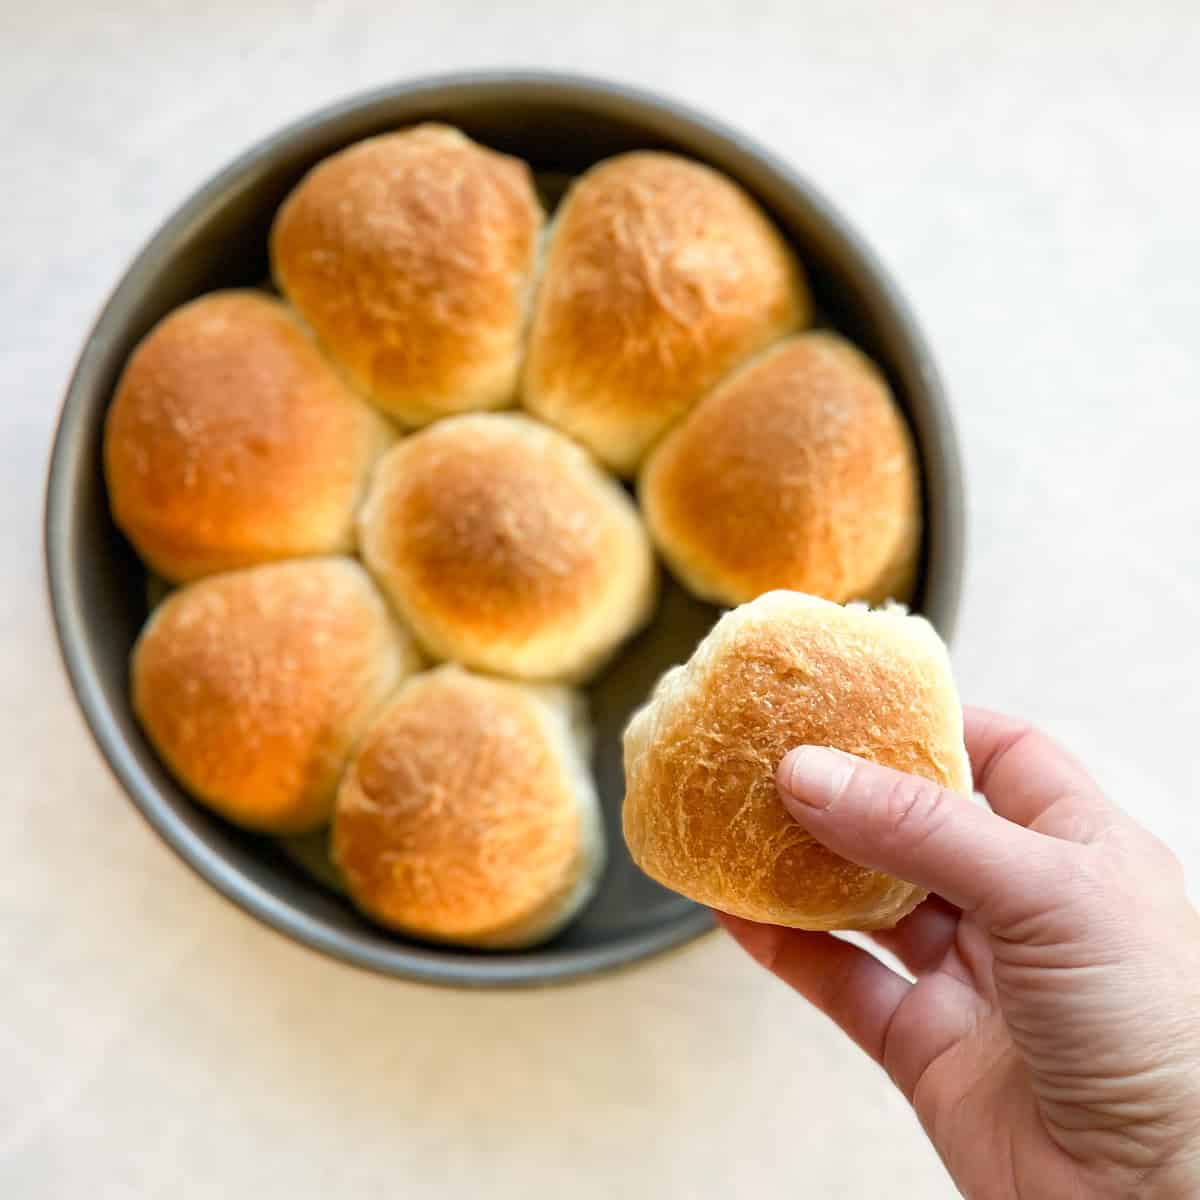 hand holding a bread roll over the remaining seven other bread rolls in the pan.